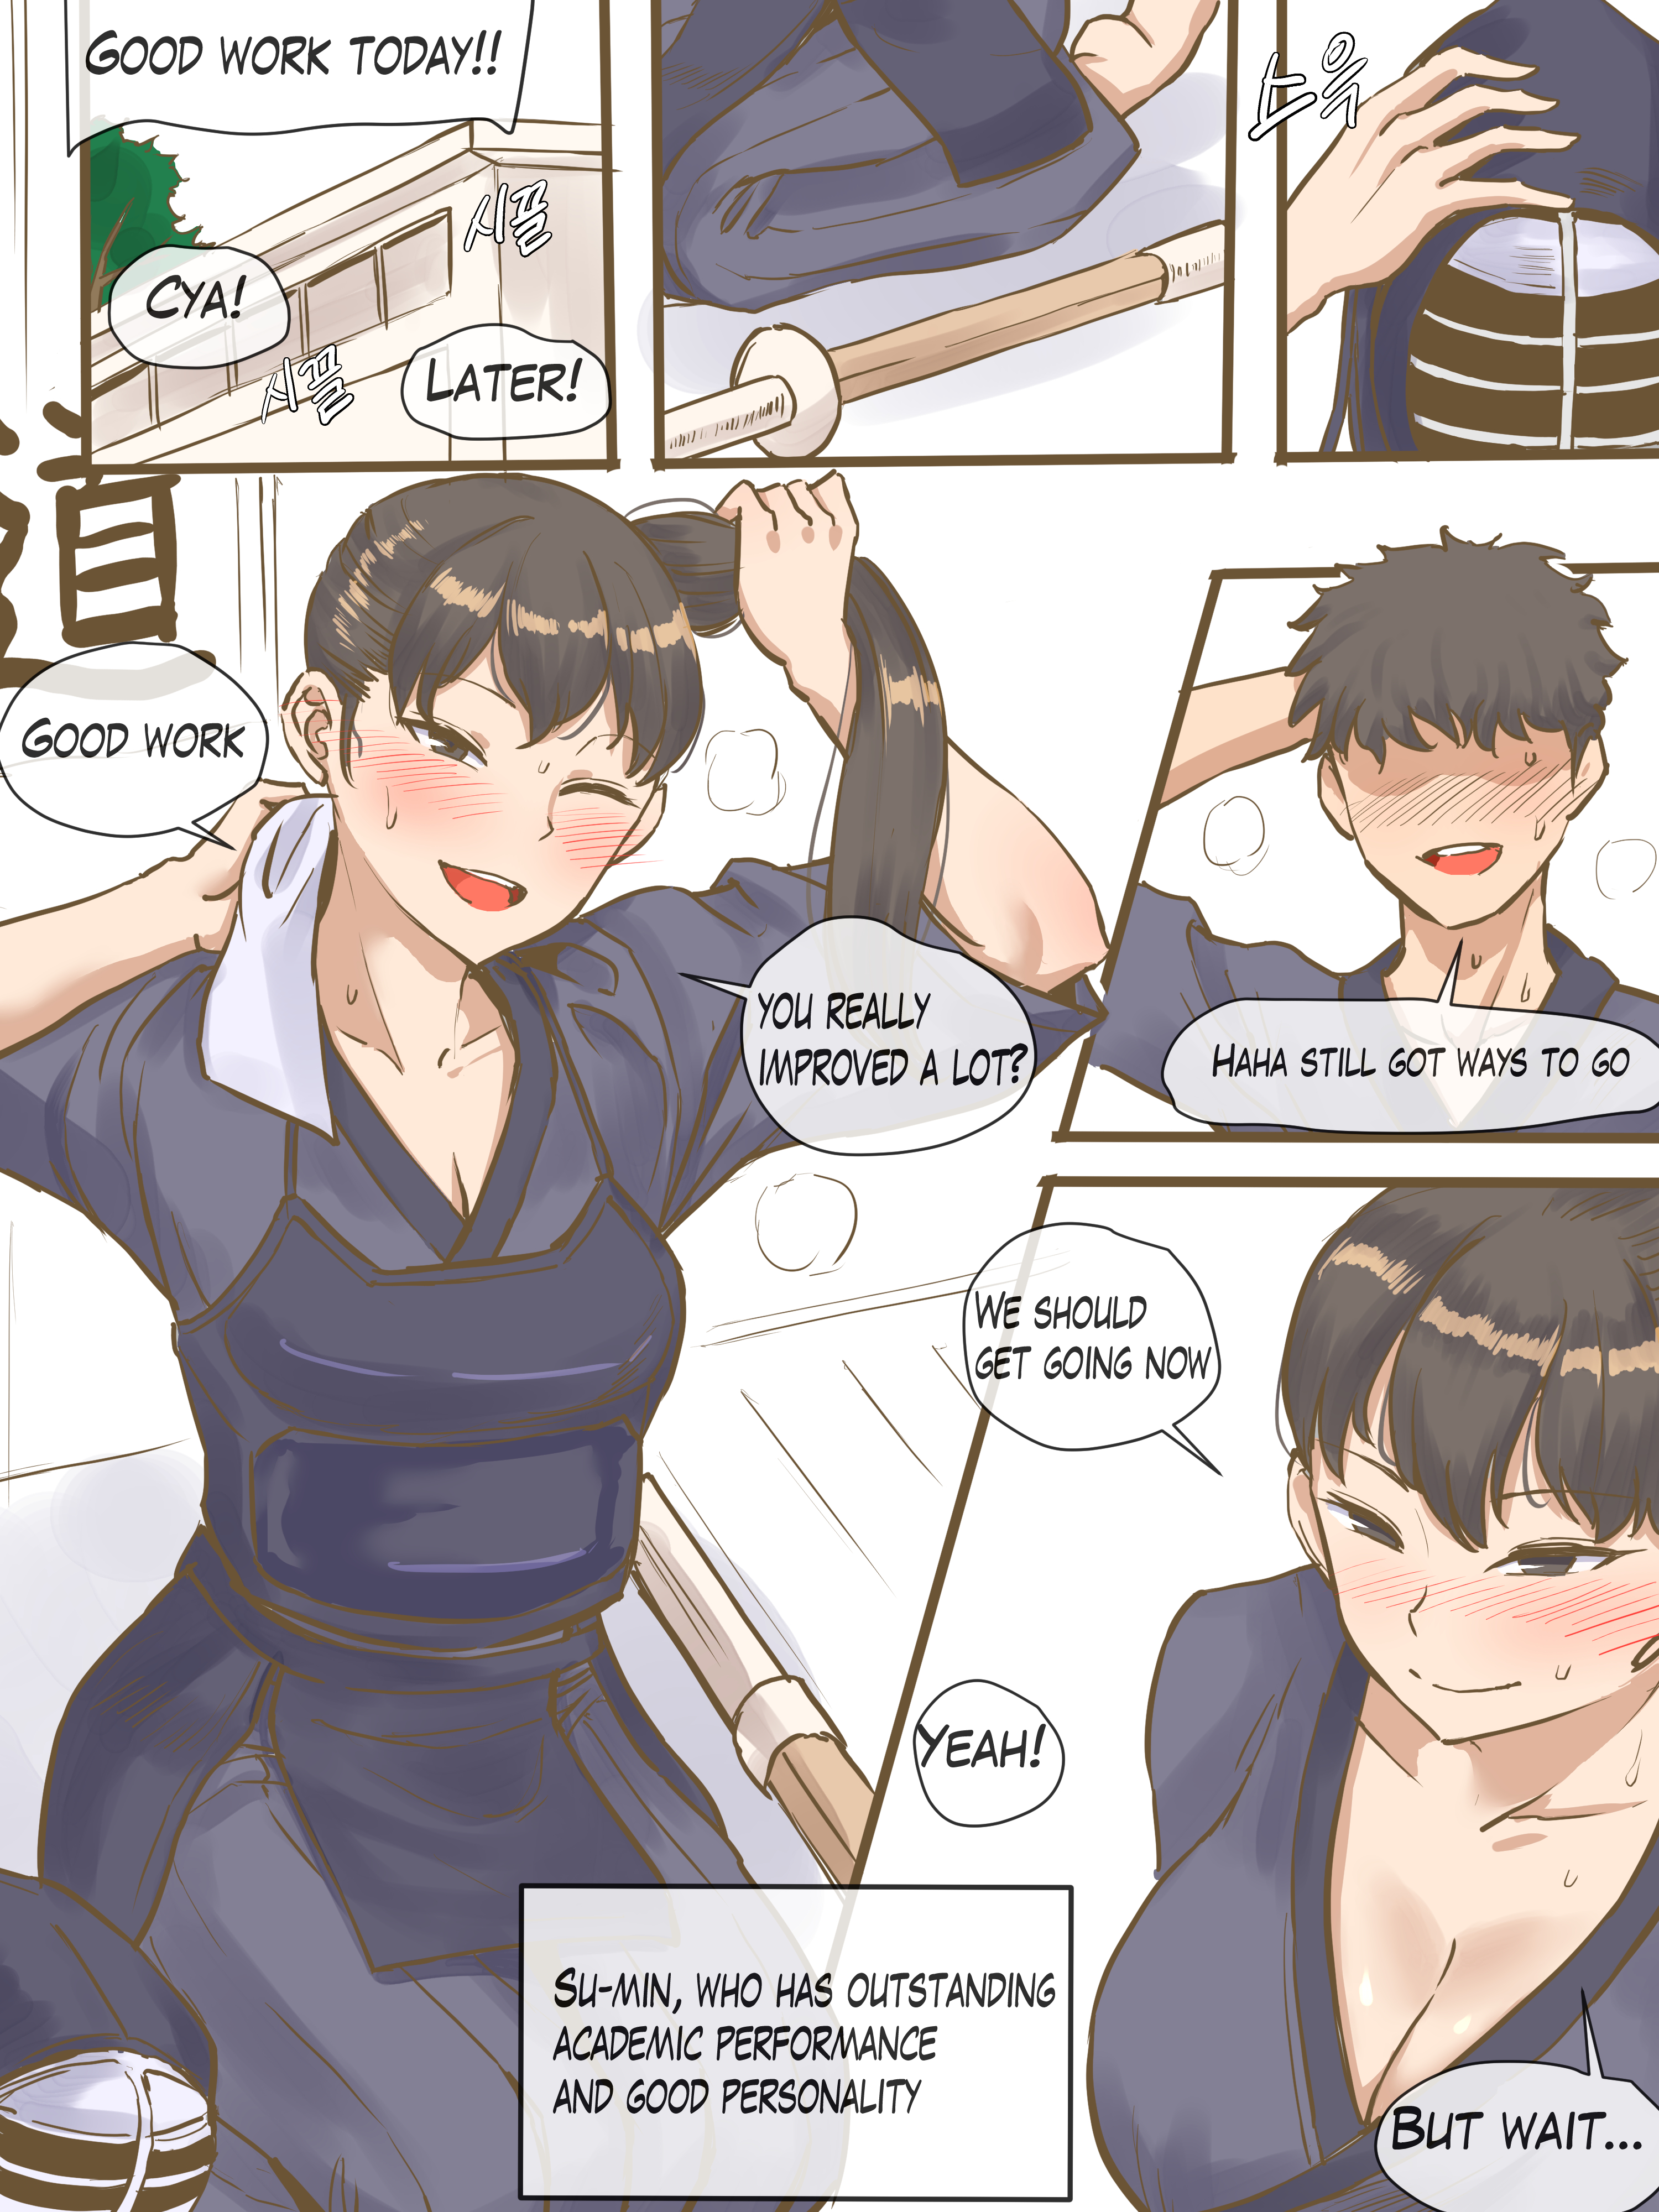 Challenge - Busty kendo girl gets tied up and fucked while boyfriend watches - NTR porn comics image